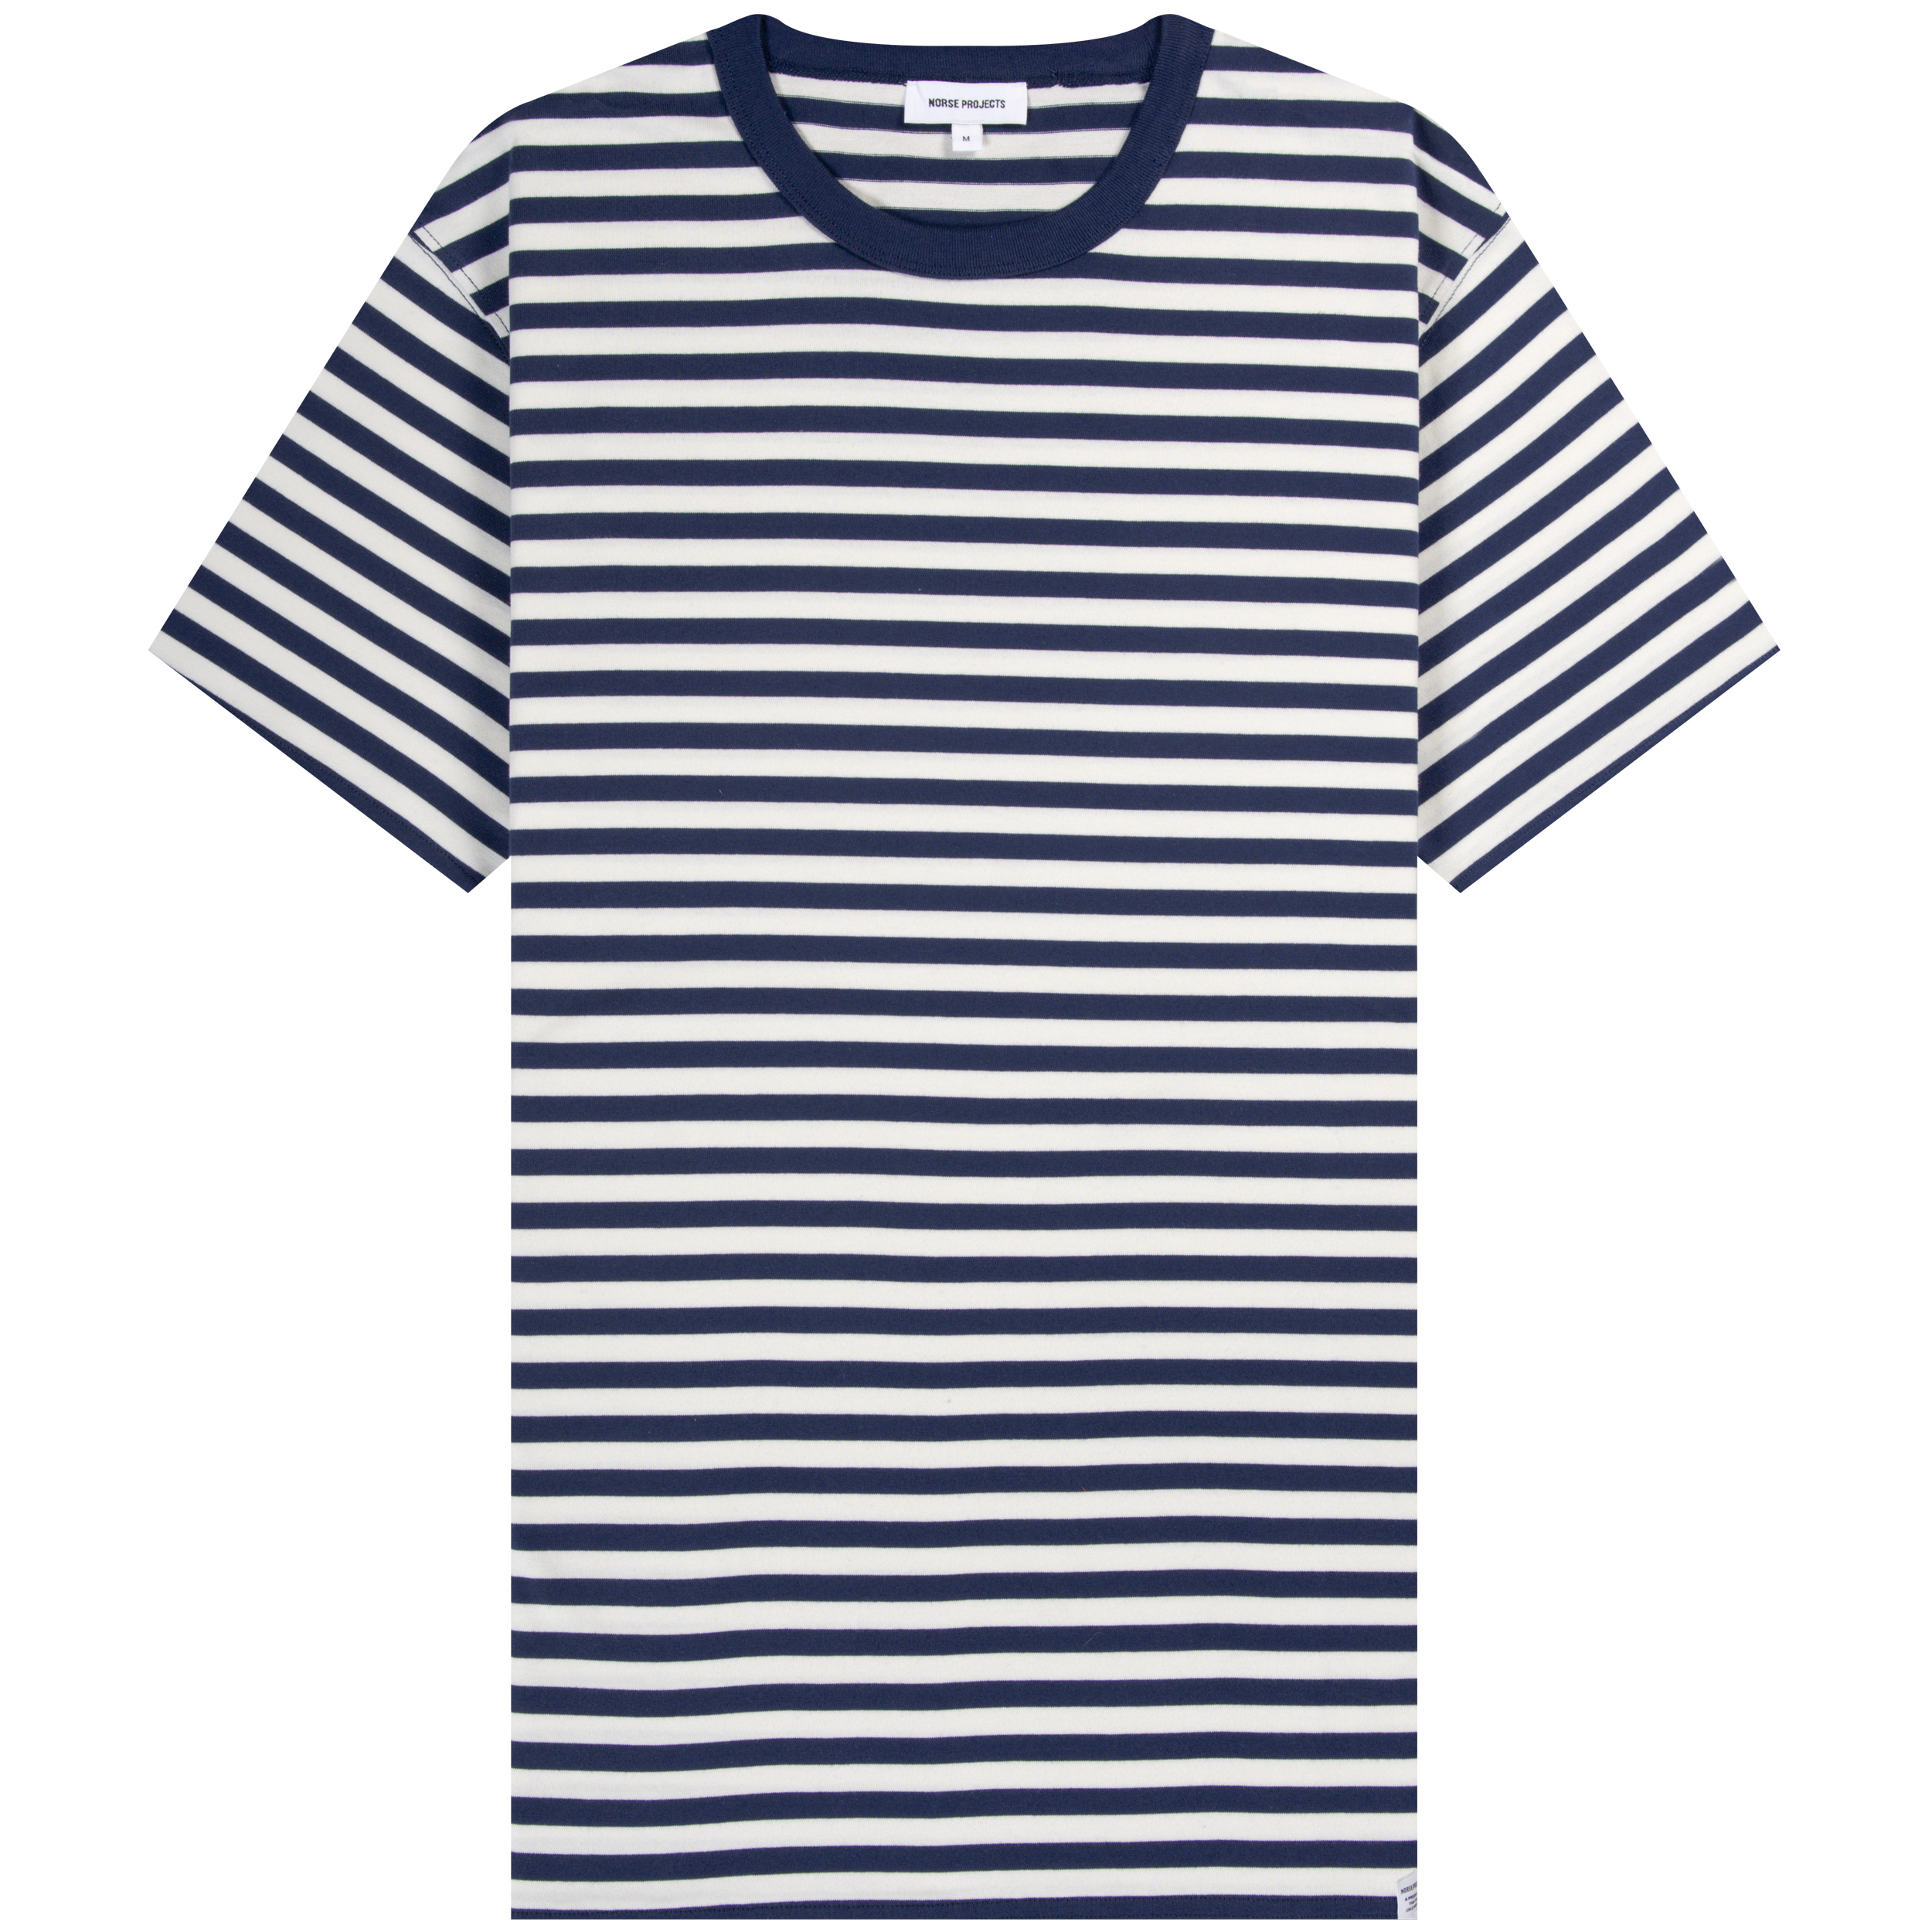 Norse Projects ’Niels’ Classic Stripe T-Shirt White/Dark Navy